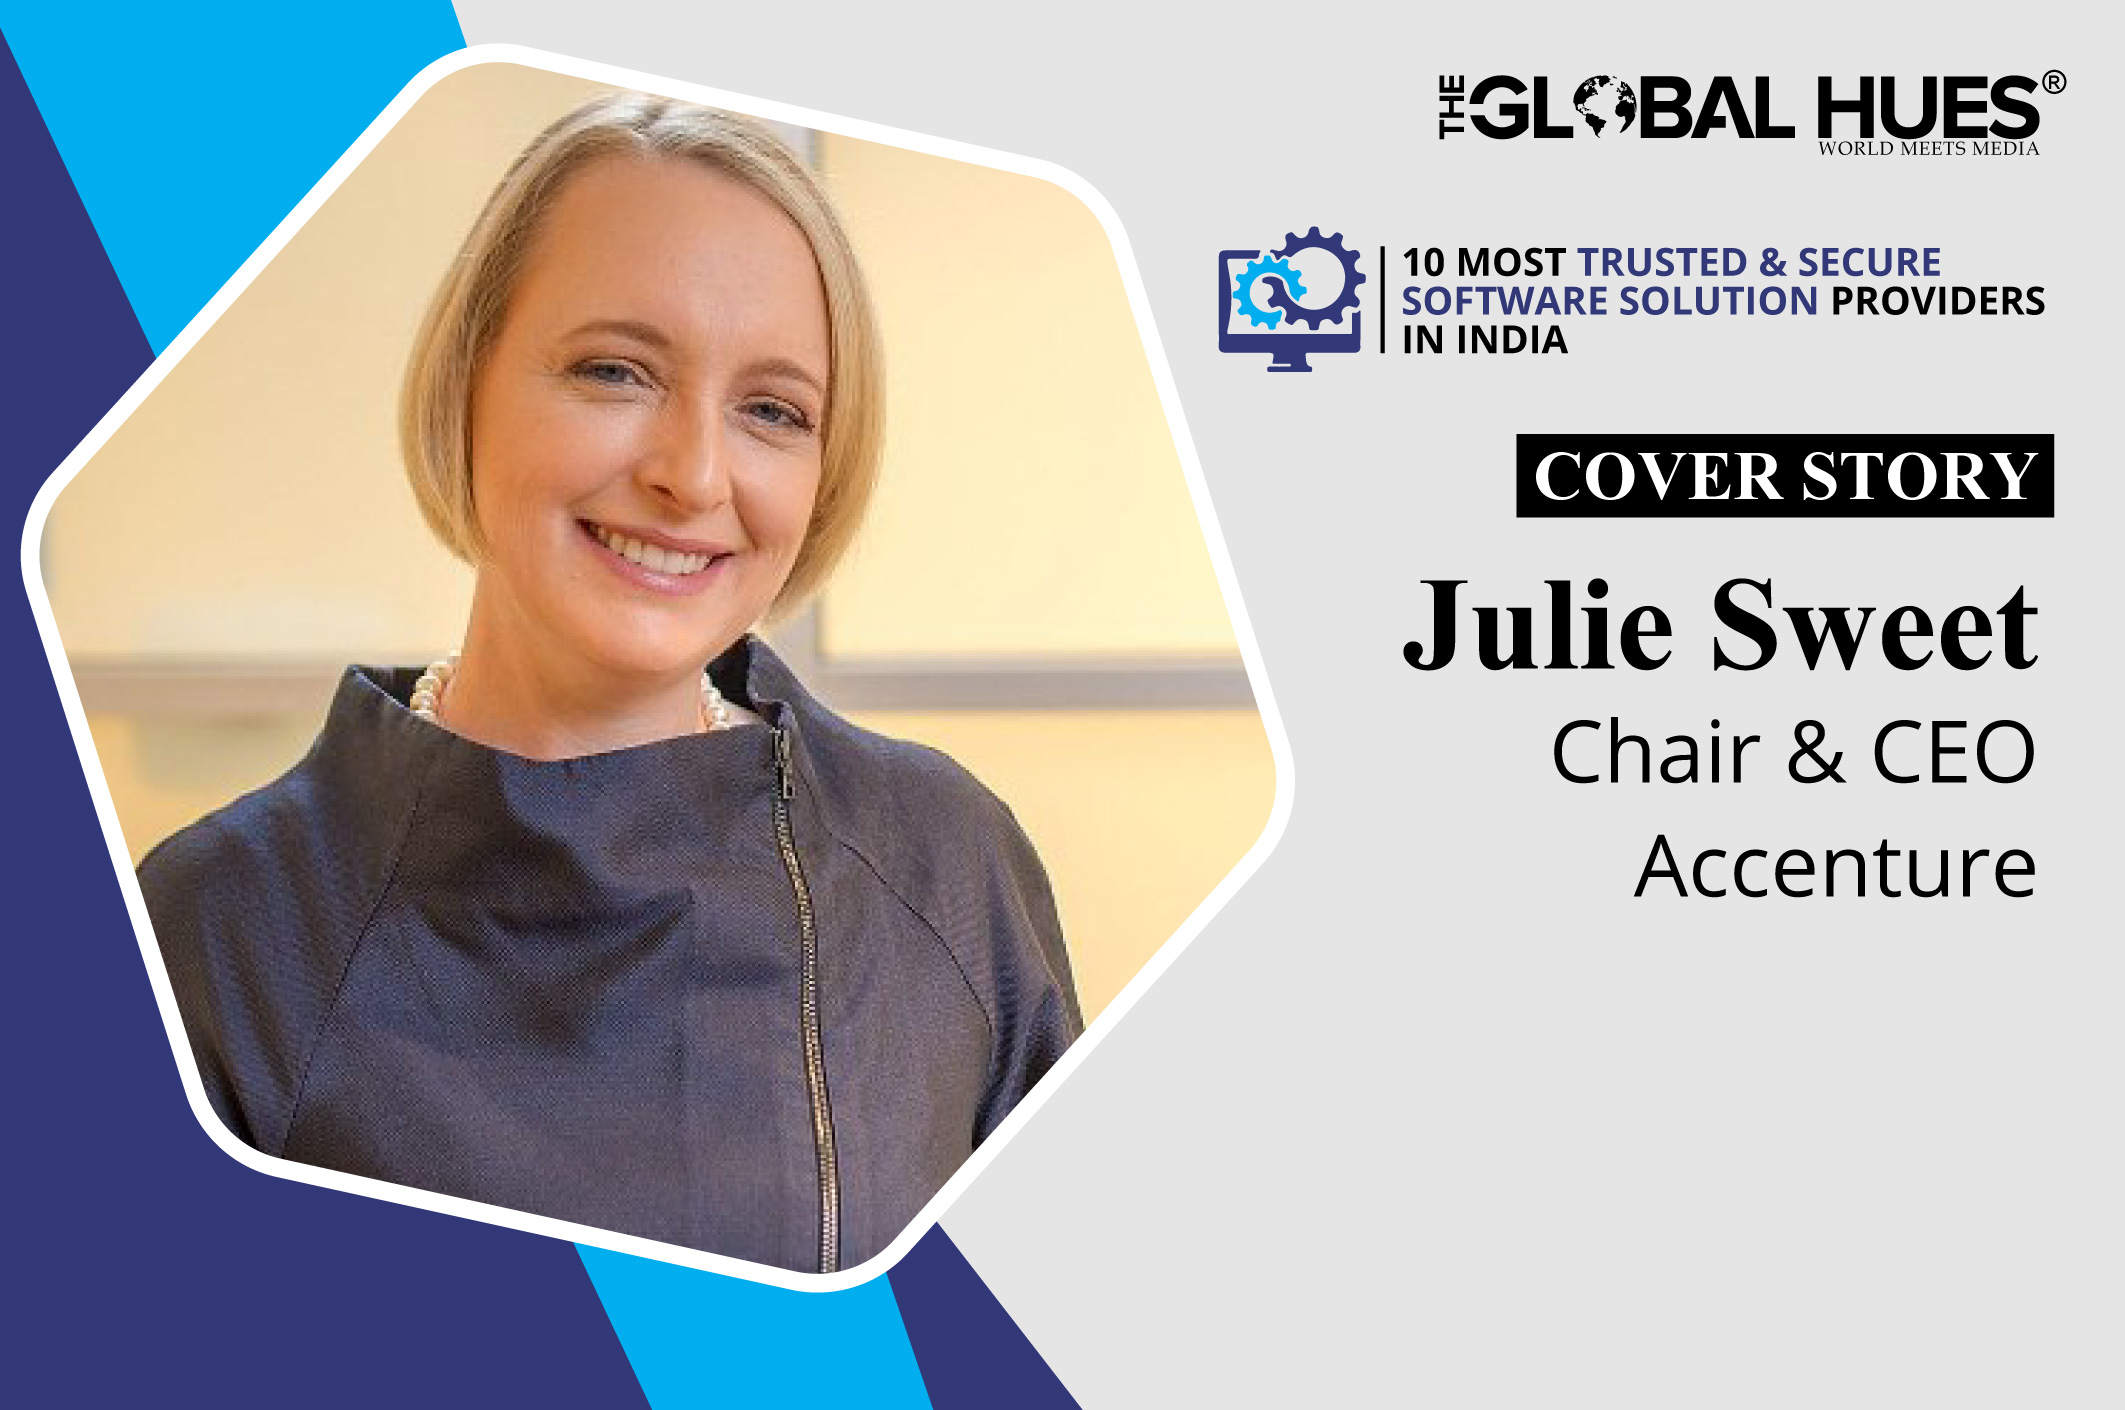 julie sweet chairperson & ceo accenture